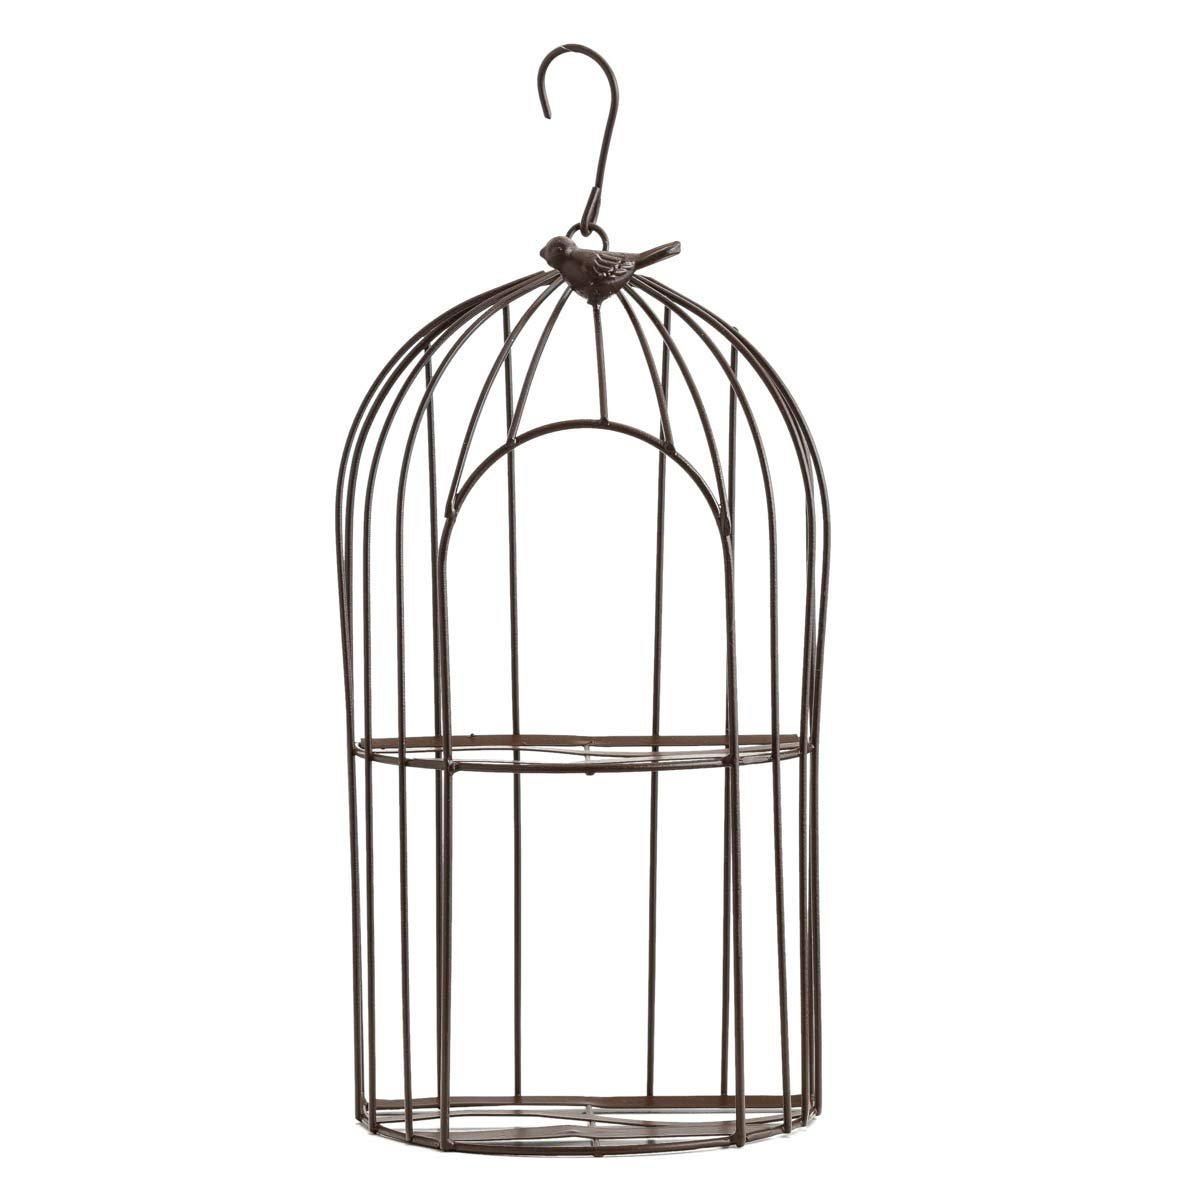 TJ Global 2-Plant Iron Birdcage Hanging Planter, Metal Wire Flower Pot Basket Wrought Iron Plant Stands for Plants, Flowers, Garden, Patio, Balcony Outdoor and Indoor Dcor - image 1 of 6